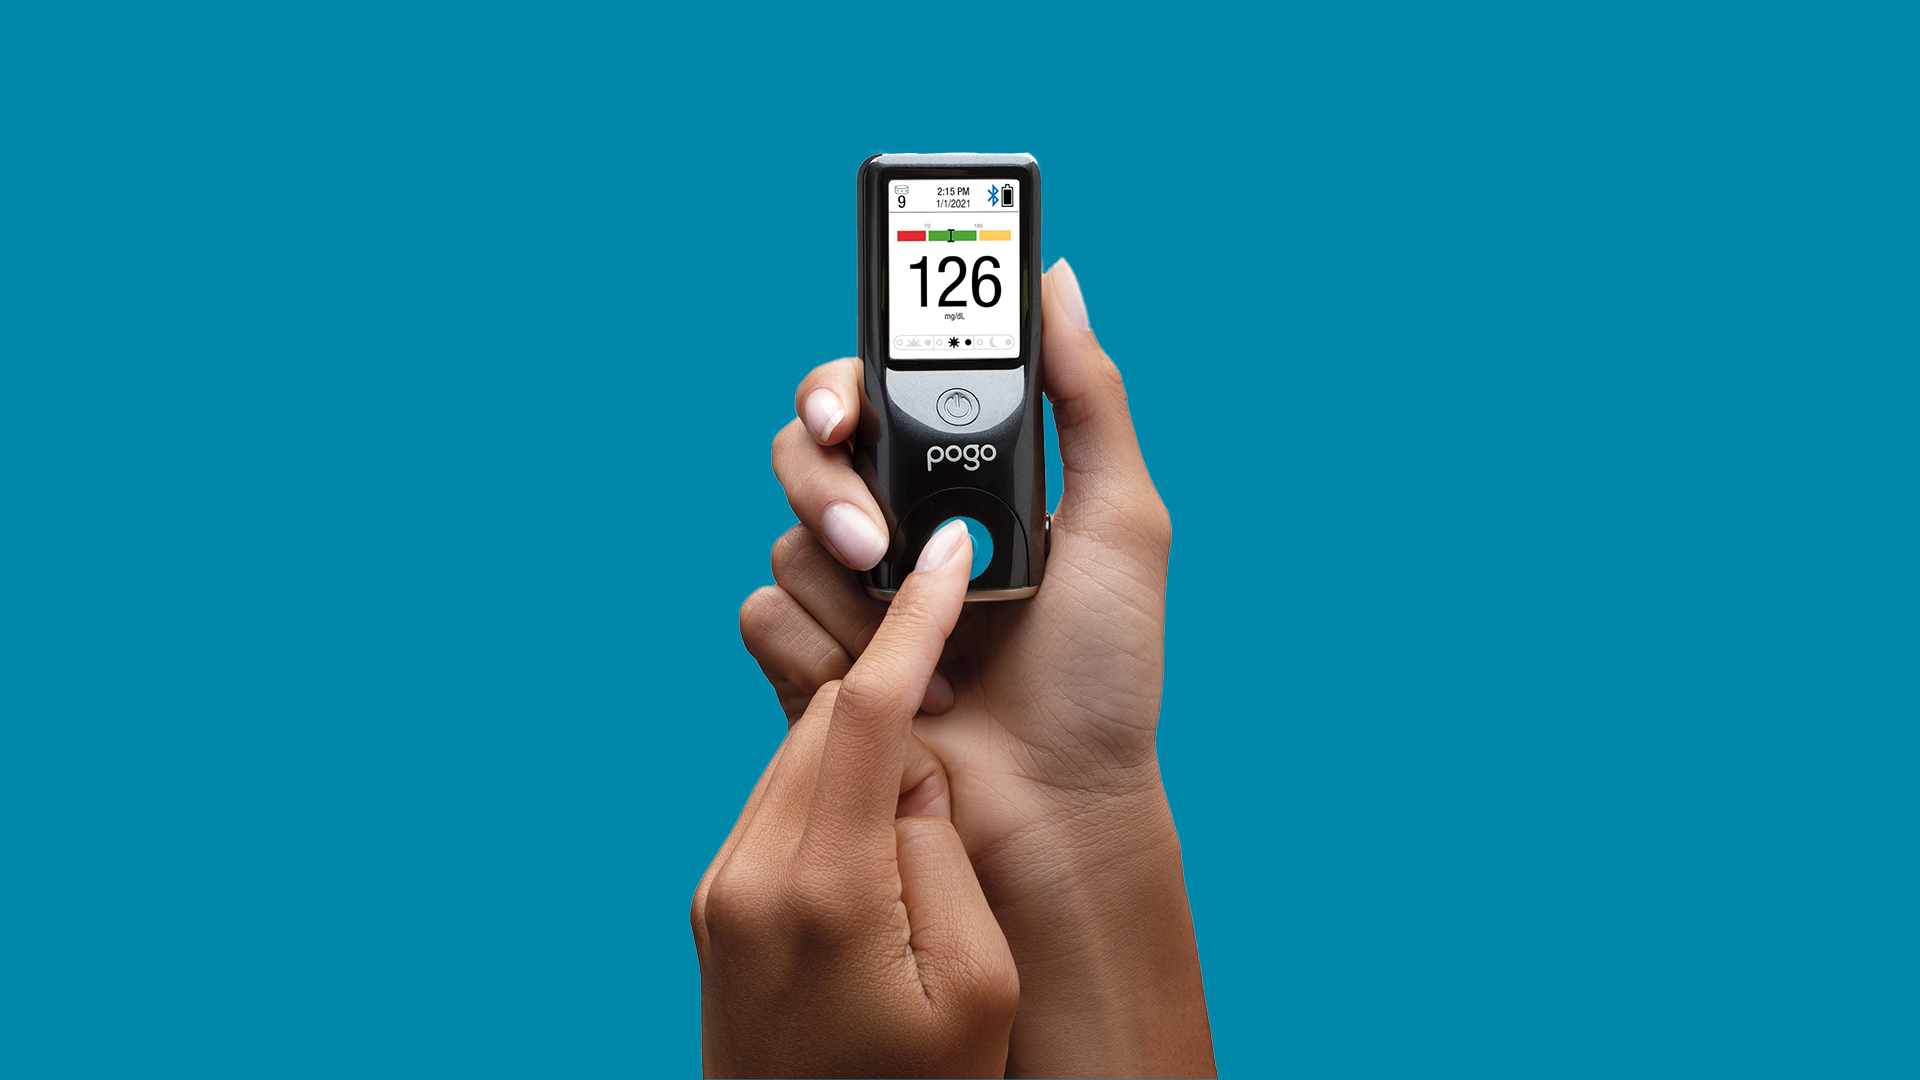 Speck Design, a leading product design company, transforms diabetes testing with the innovative POGO Automatic® in partnership with Intuity Medical.